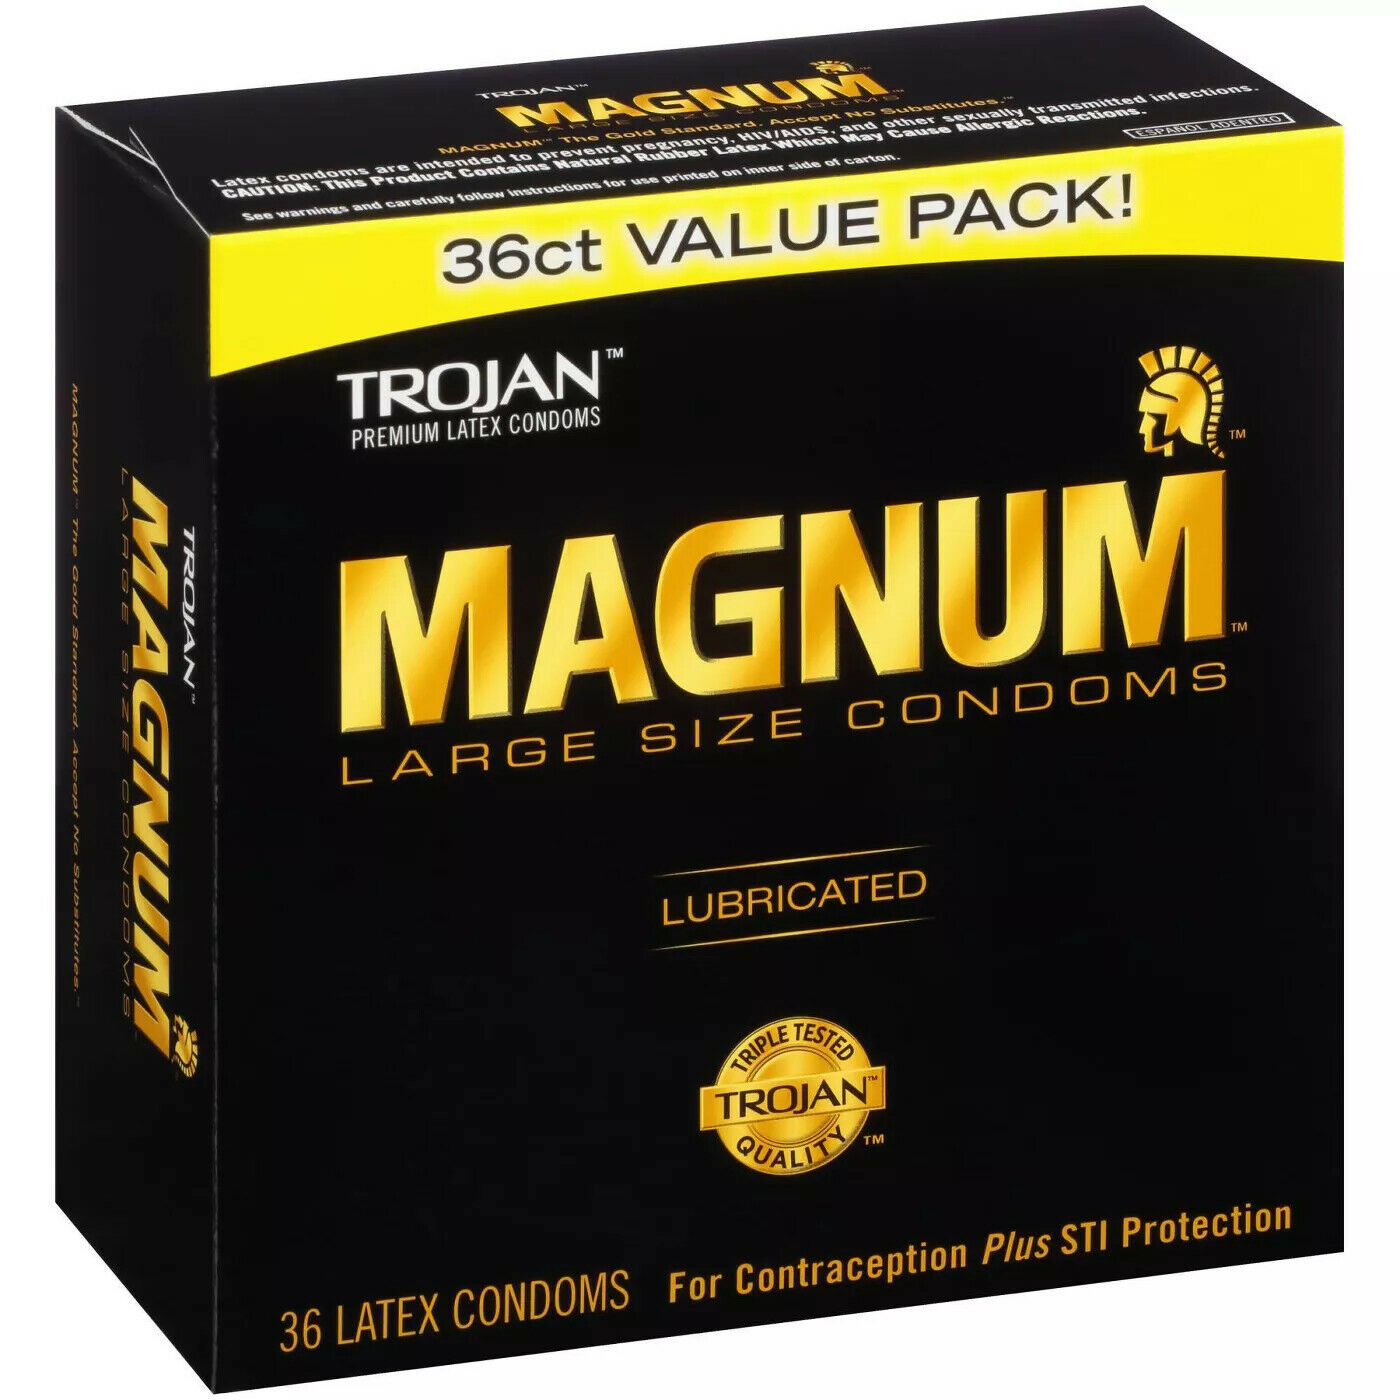 TROJAN Magnum Large Size Condoms For Comfort And Sensitivity, 36 Count, 1 Pack